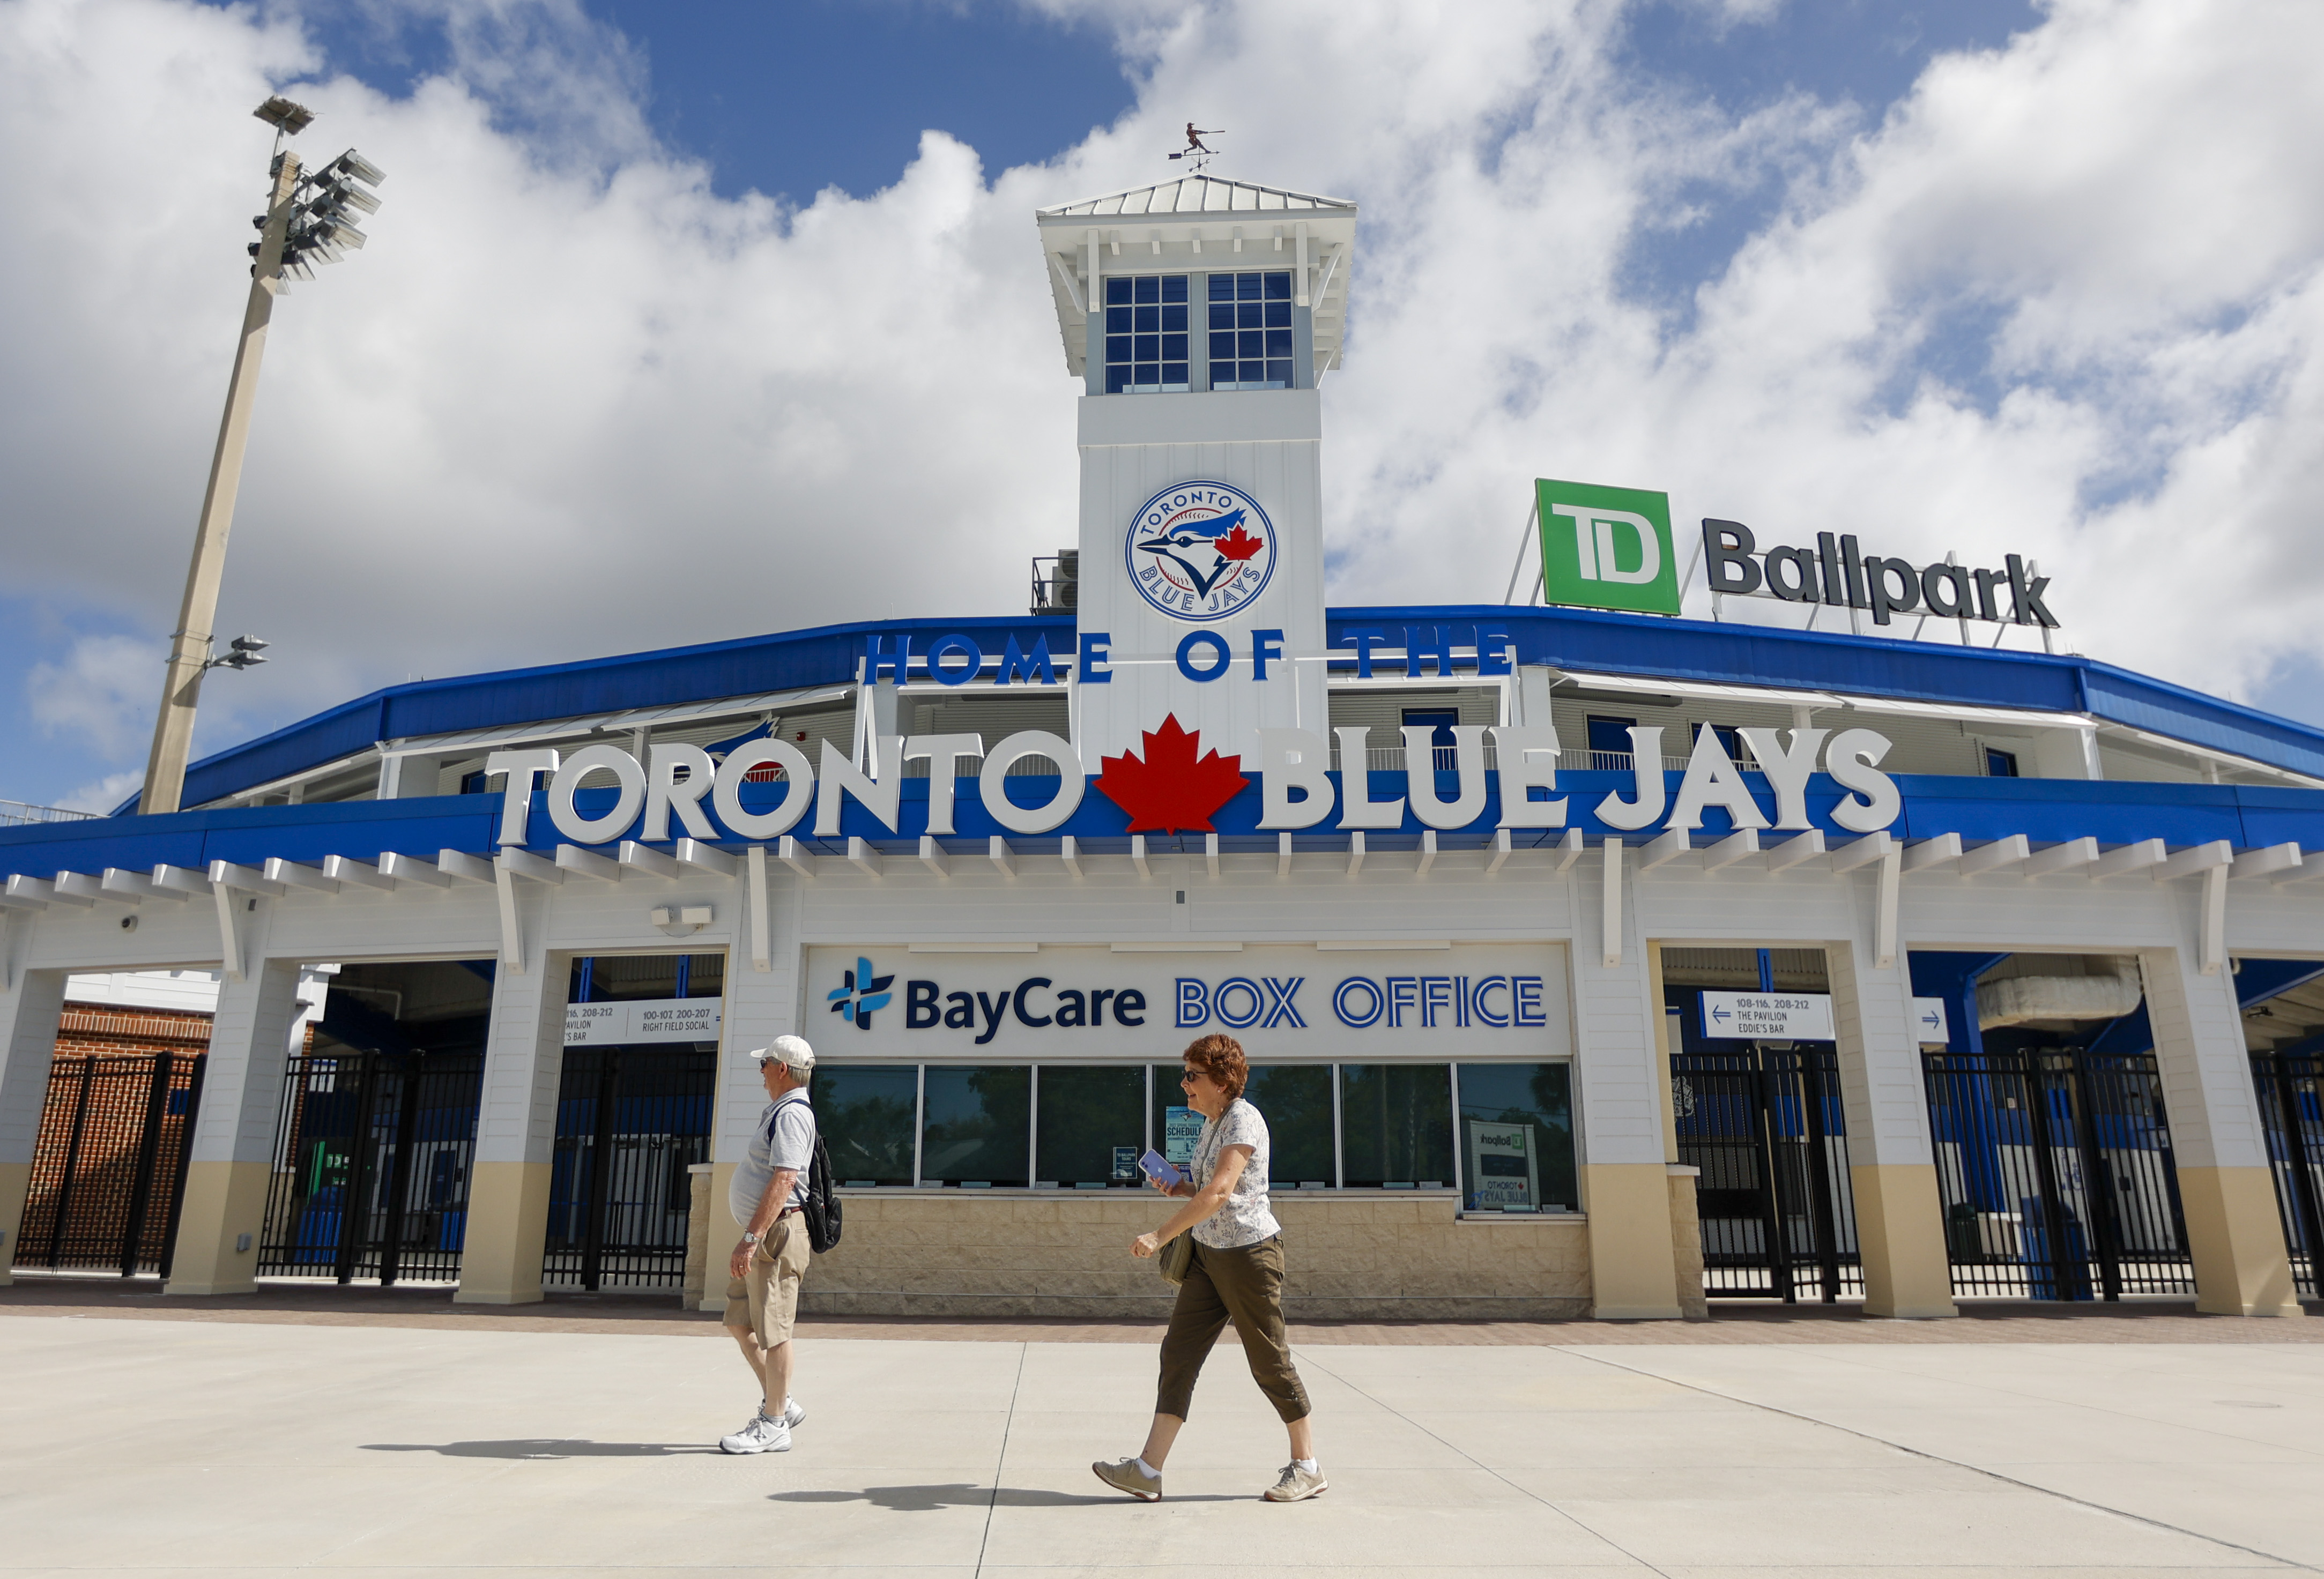 Toronto Blue Jays Starting Season In Florida Over Covid Travel Restrictions  - The New York Times